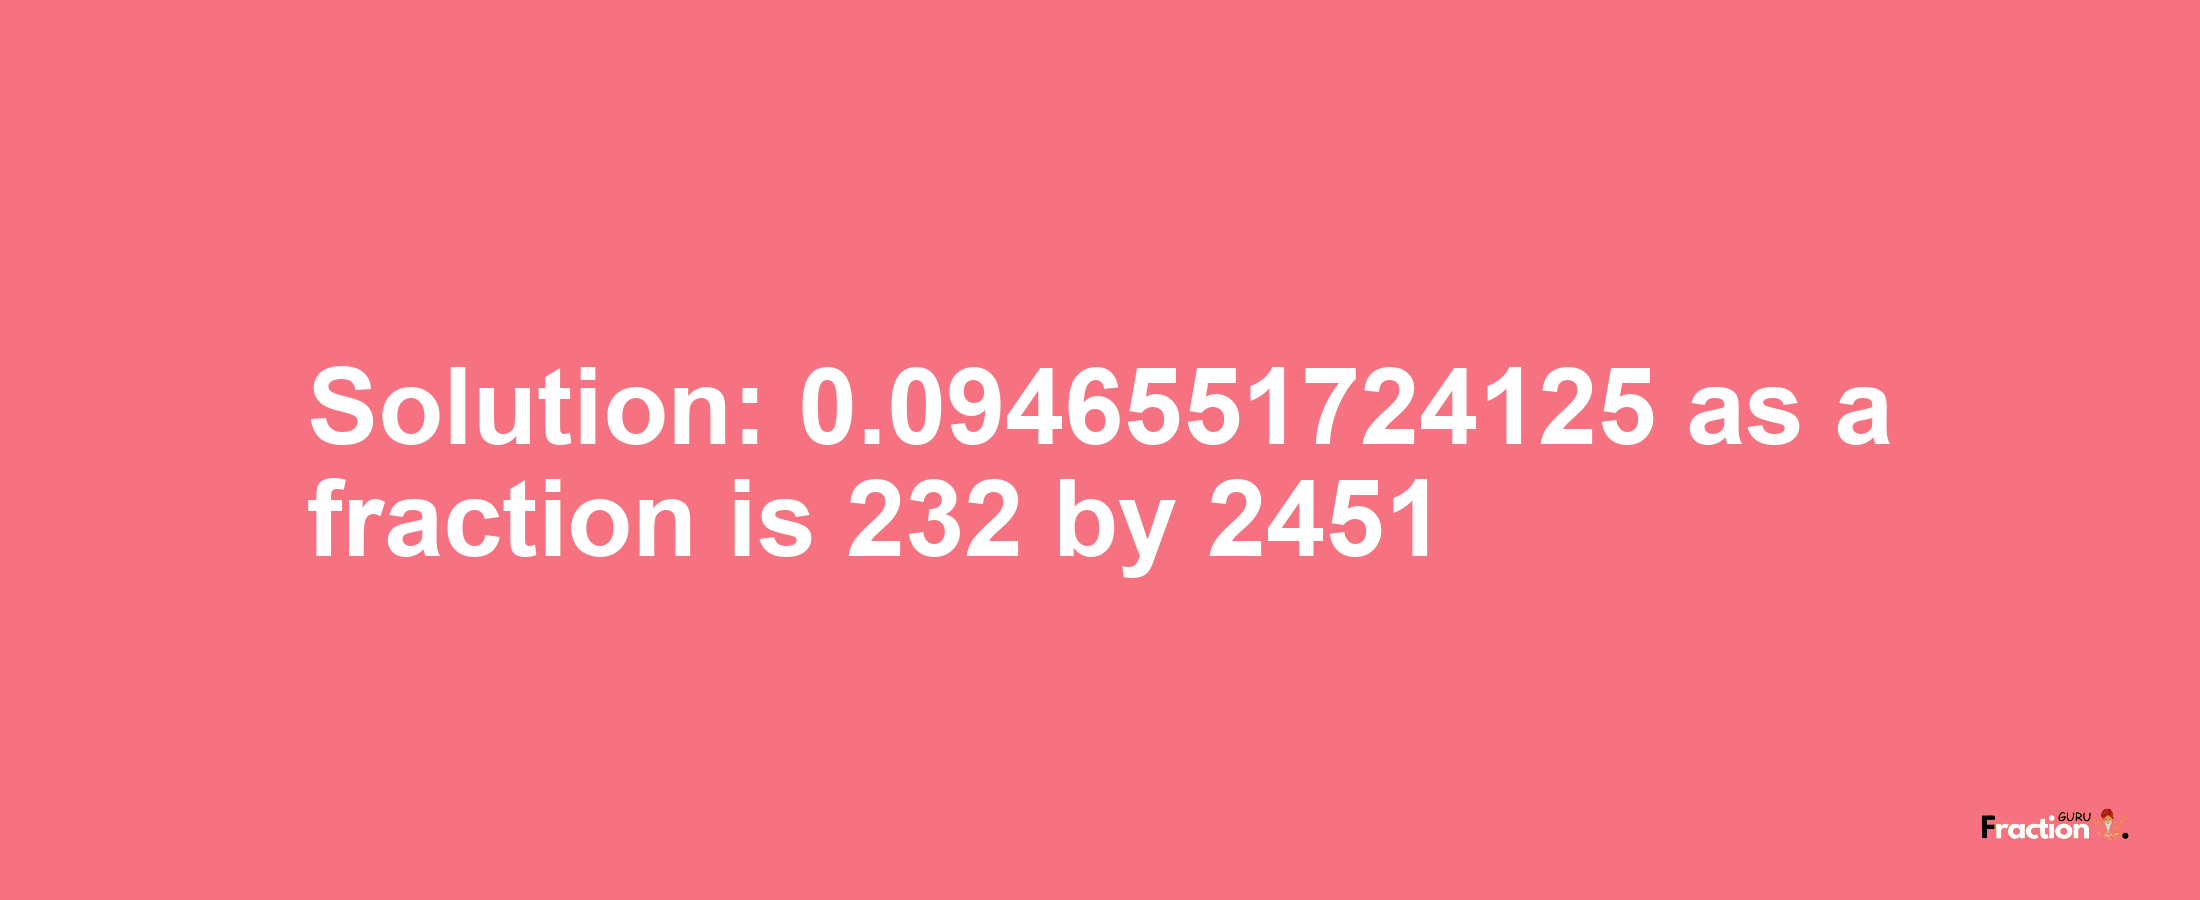 Solution:0.0946551724125 as a fraction is 232/2451